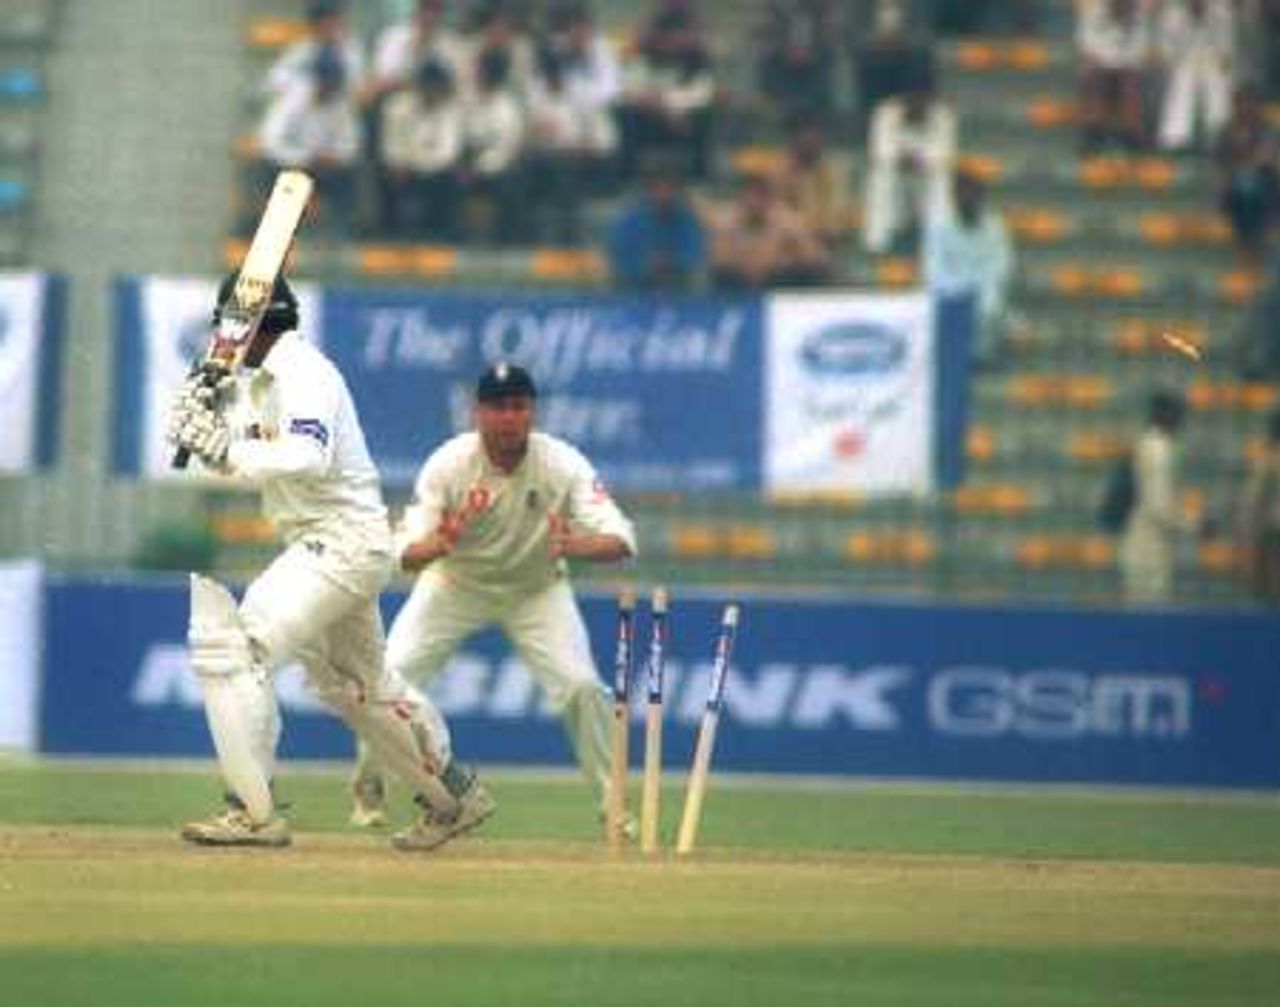 Bails fly as Elahi is clean bowled by White, Day 4, 1st Test Match, Pakistan v England at Lahore, 15-19 Nov 2000